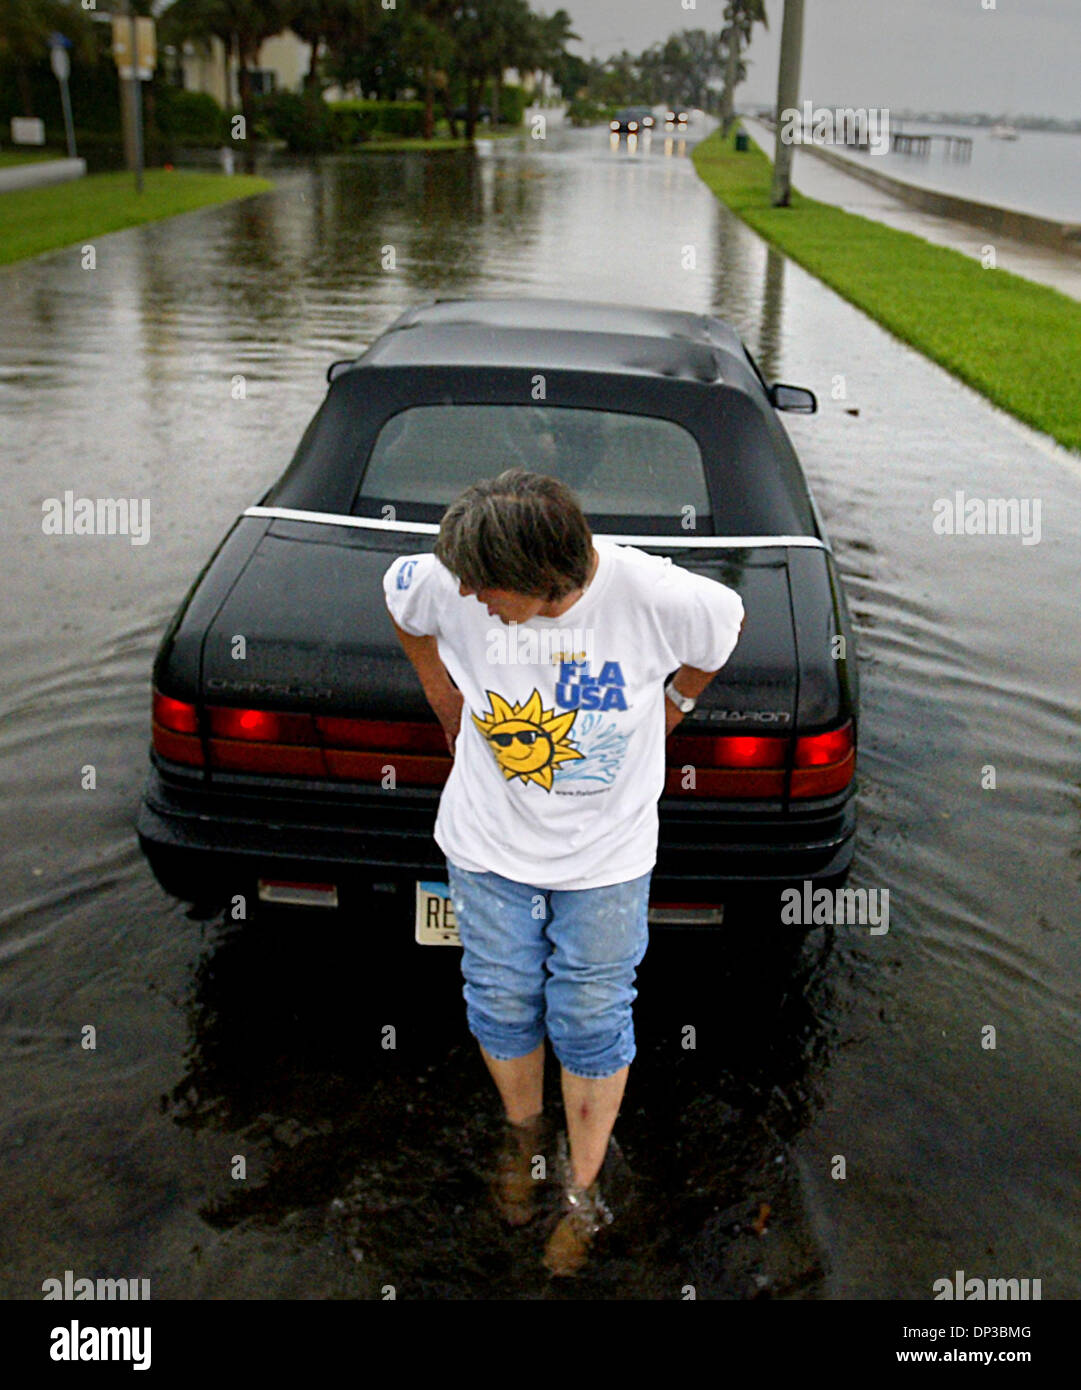 Jun 27, 2006; West Palm Beach, FL, USA; Following yesterday's afternoon downpours, Cathy Riegle of Hobe Sound struggles to push her friend Kaye Cooke in her Chrysler Lebaron down flooded Flagler Dr. just north of Southern Blvd.  Riegle had traveled to an appointment with Cooke and the two women were headed to find themselves some dinner in an area restaurant when Cooke's stalled.   Stock Photo